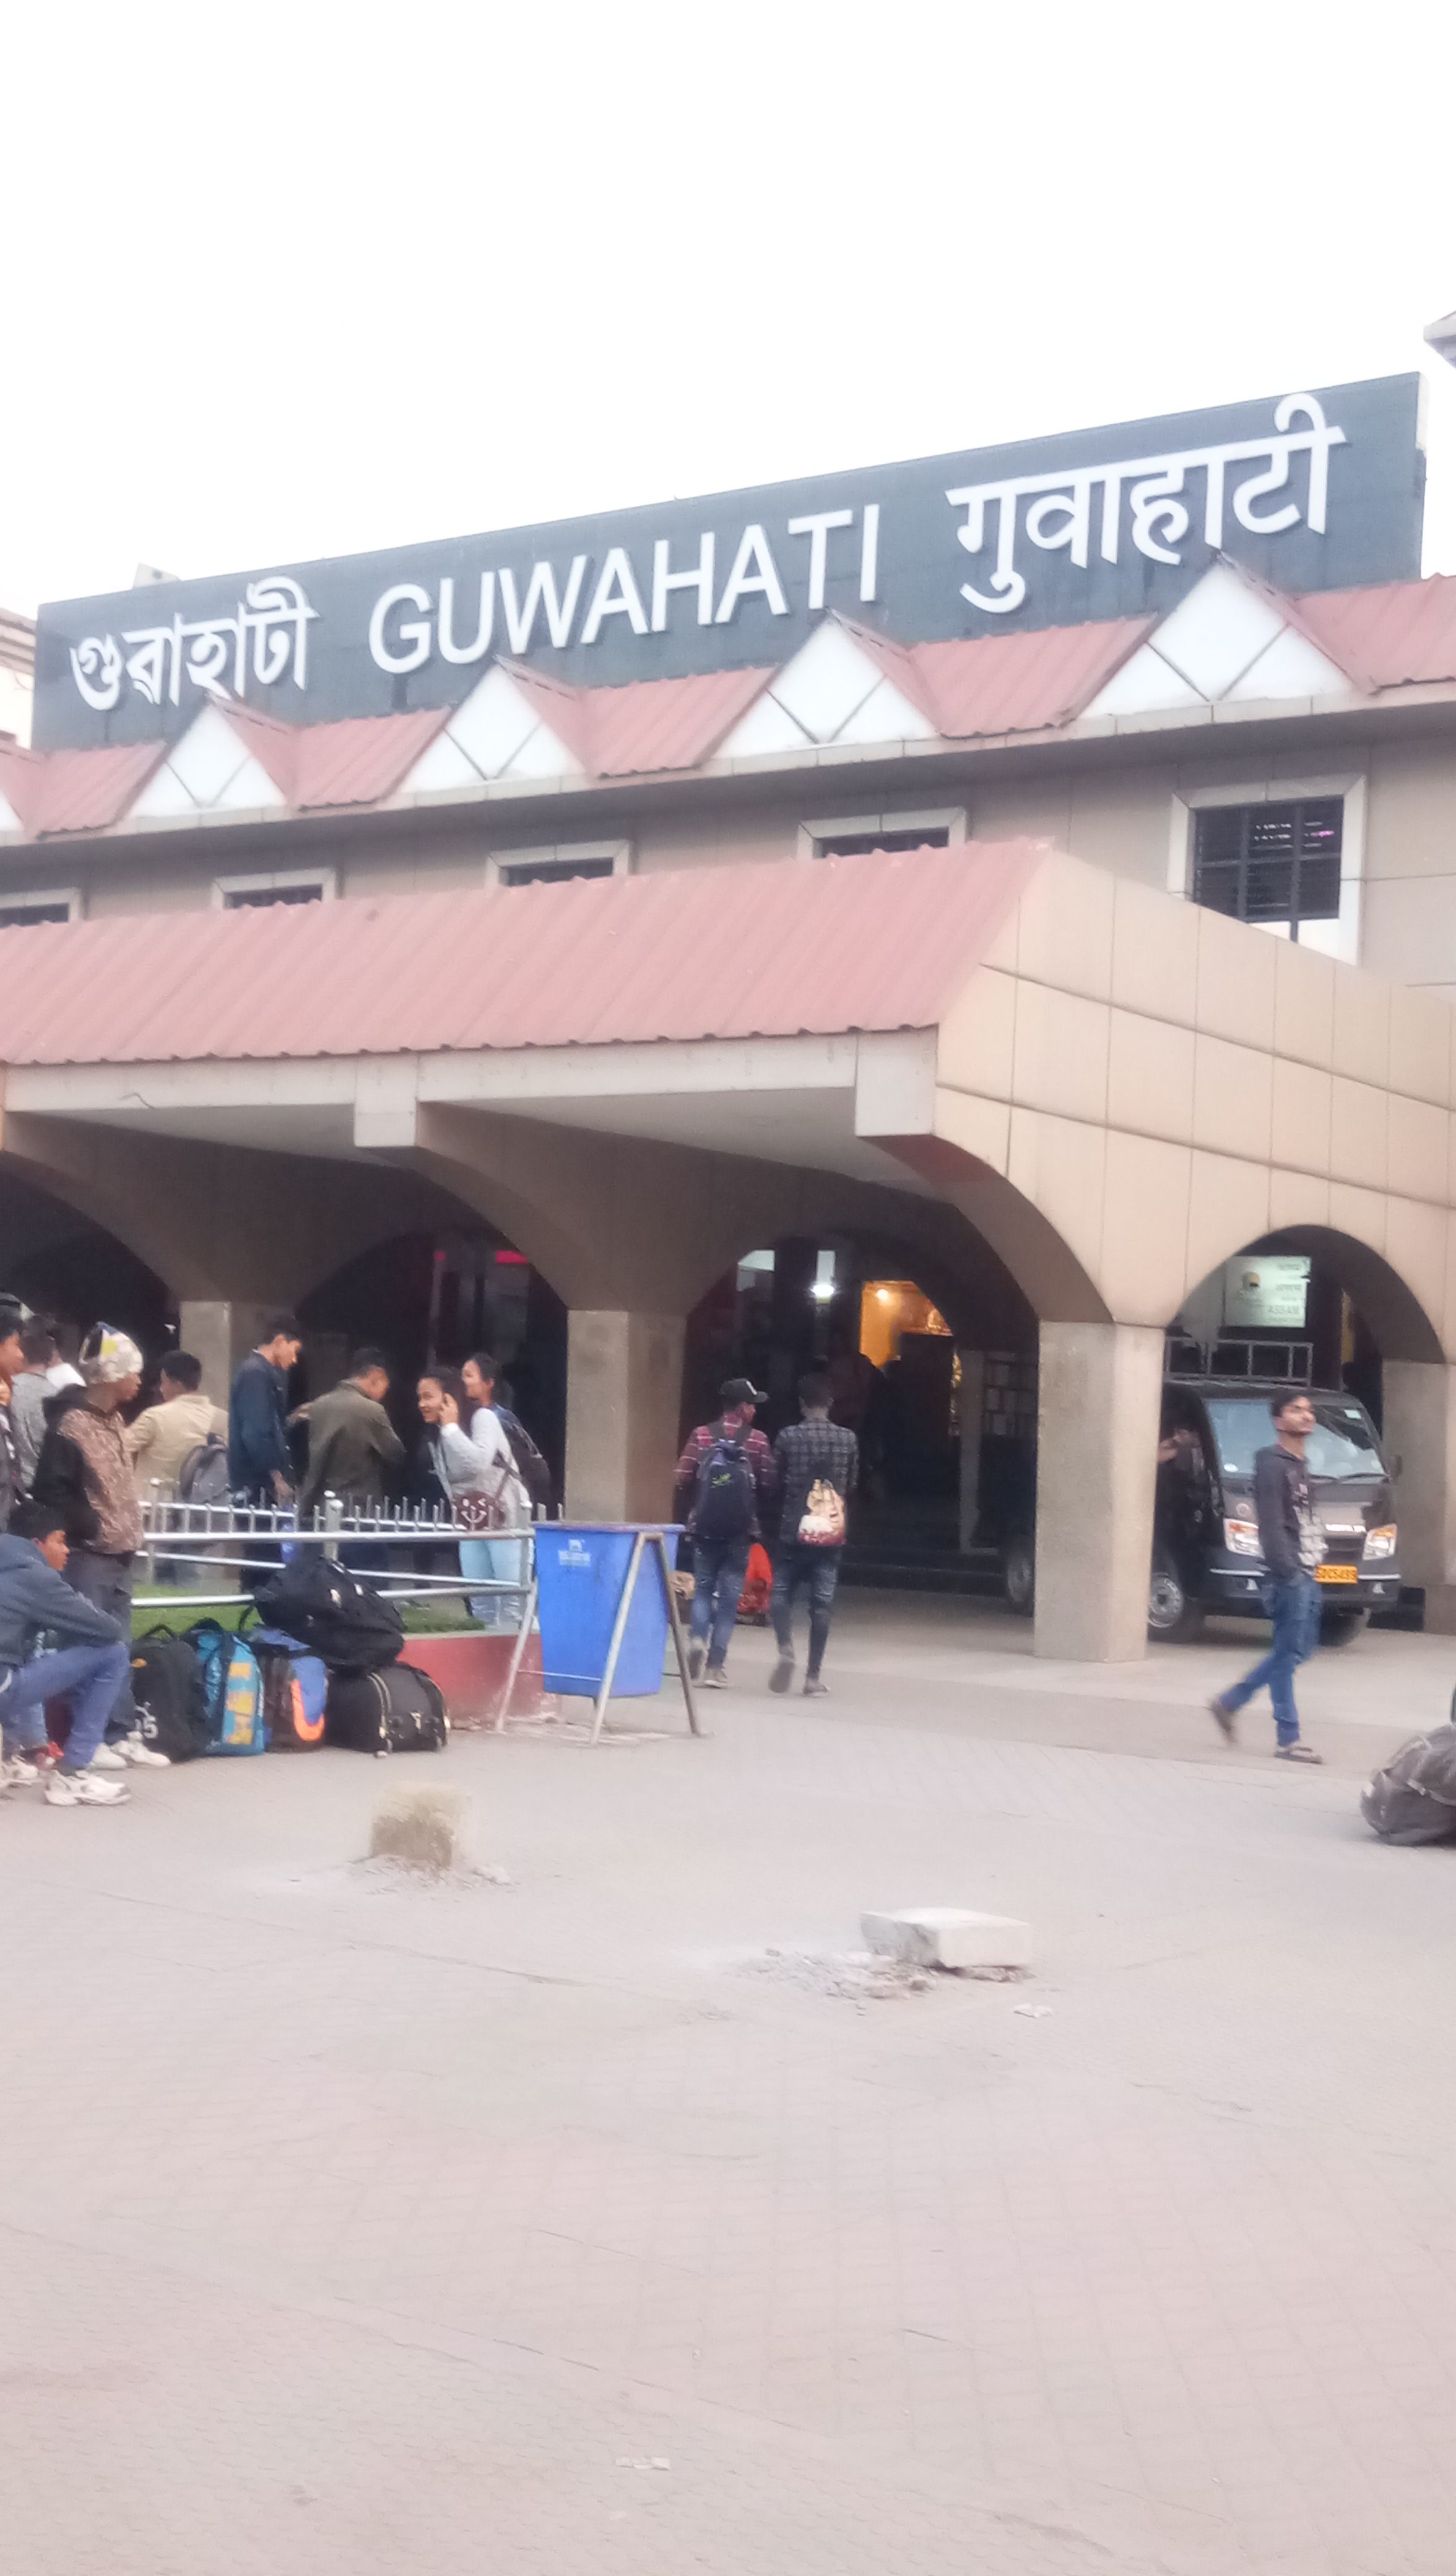 Caption Photo-Guwahati Railway Sation,Busy and fast Station in North-East,Here have to see many busy peoples,Front side can book your online Car and next you go Hotel,Next day Attraction places ,Really good enviroment sarounding places Most Views is National parks,International Airport and more Foods of Indian  .Location of Photo-Guwahati Railway Station,Assam in India,